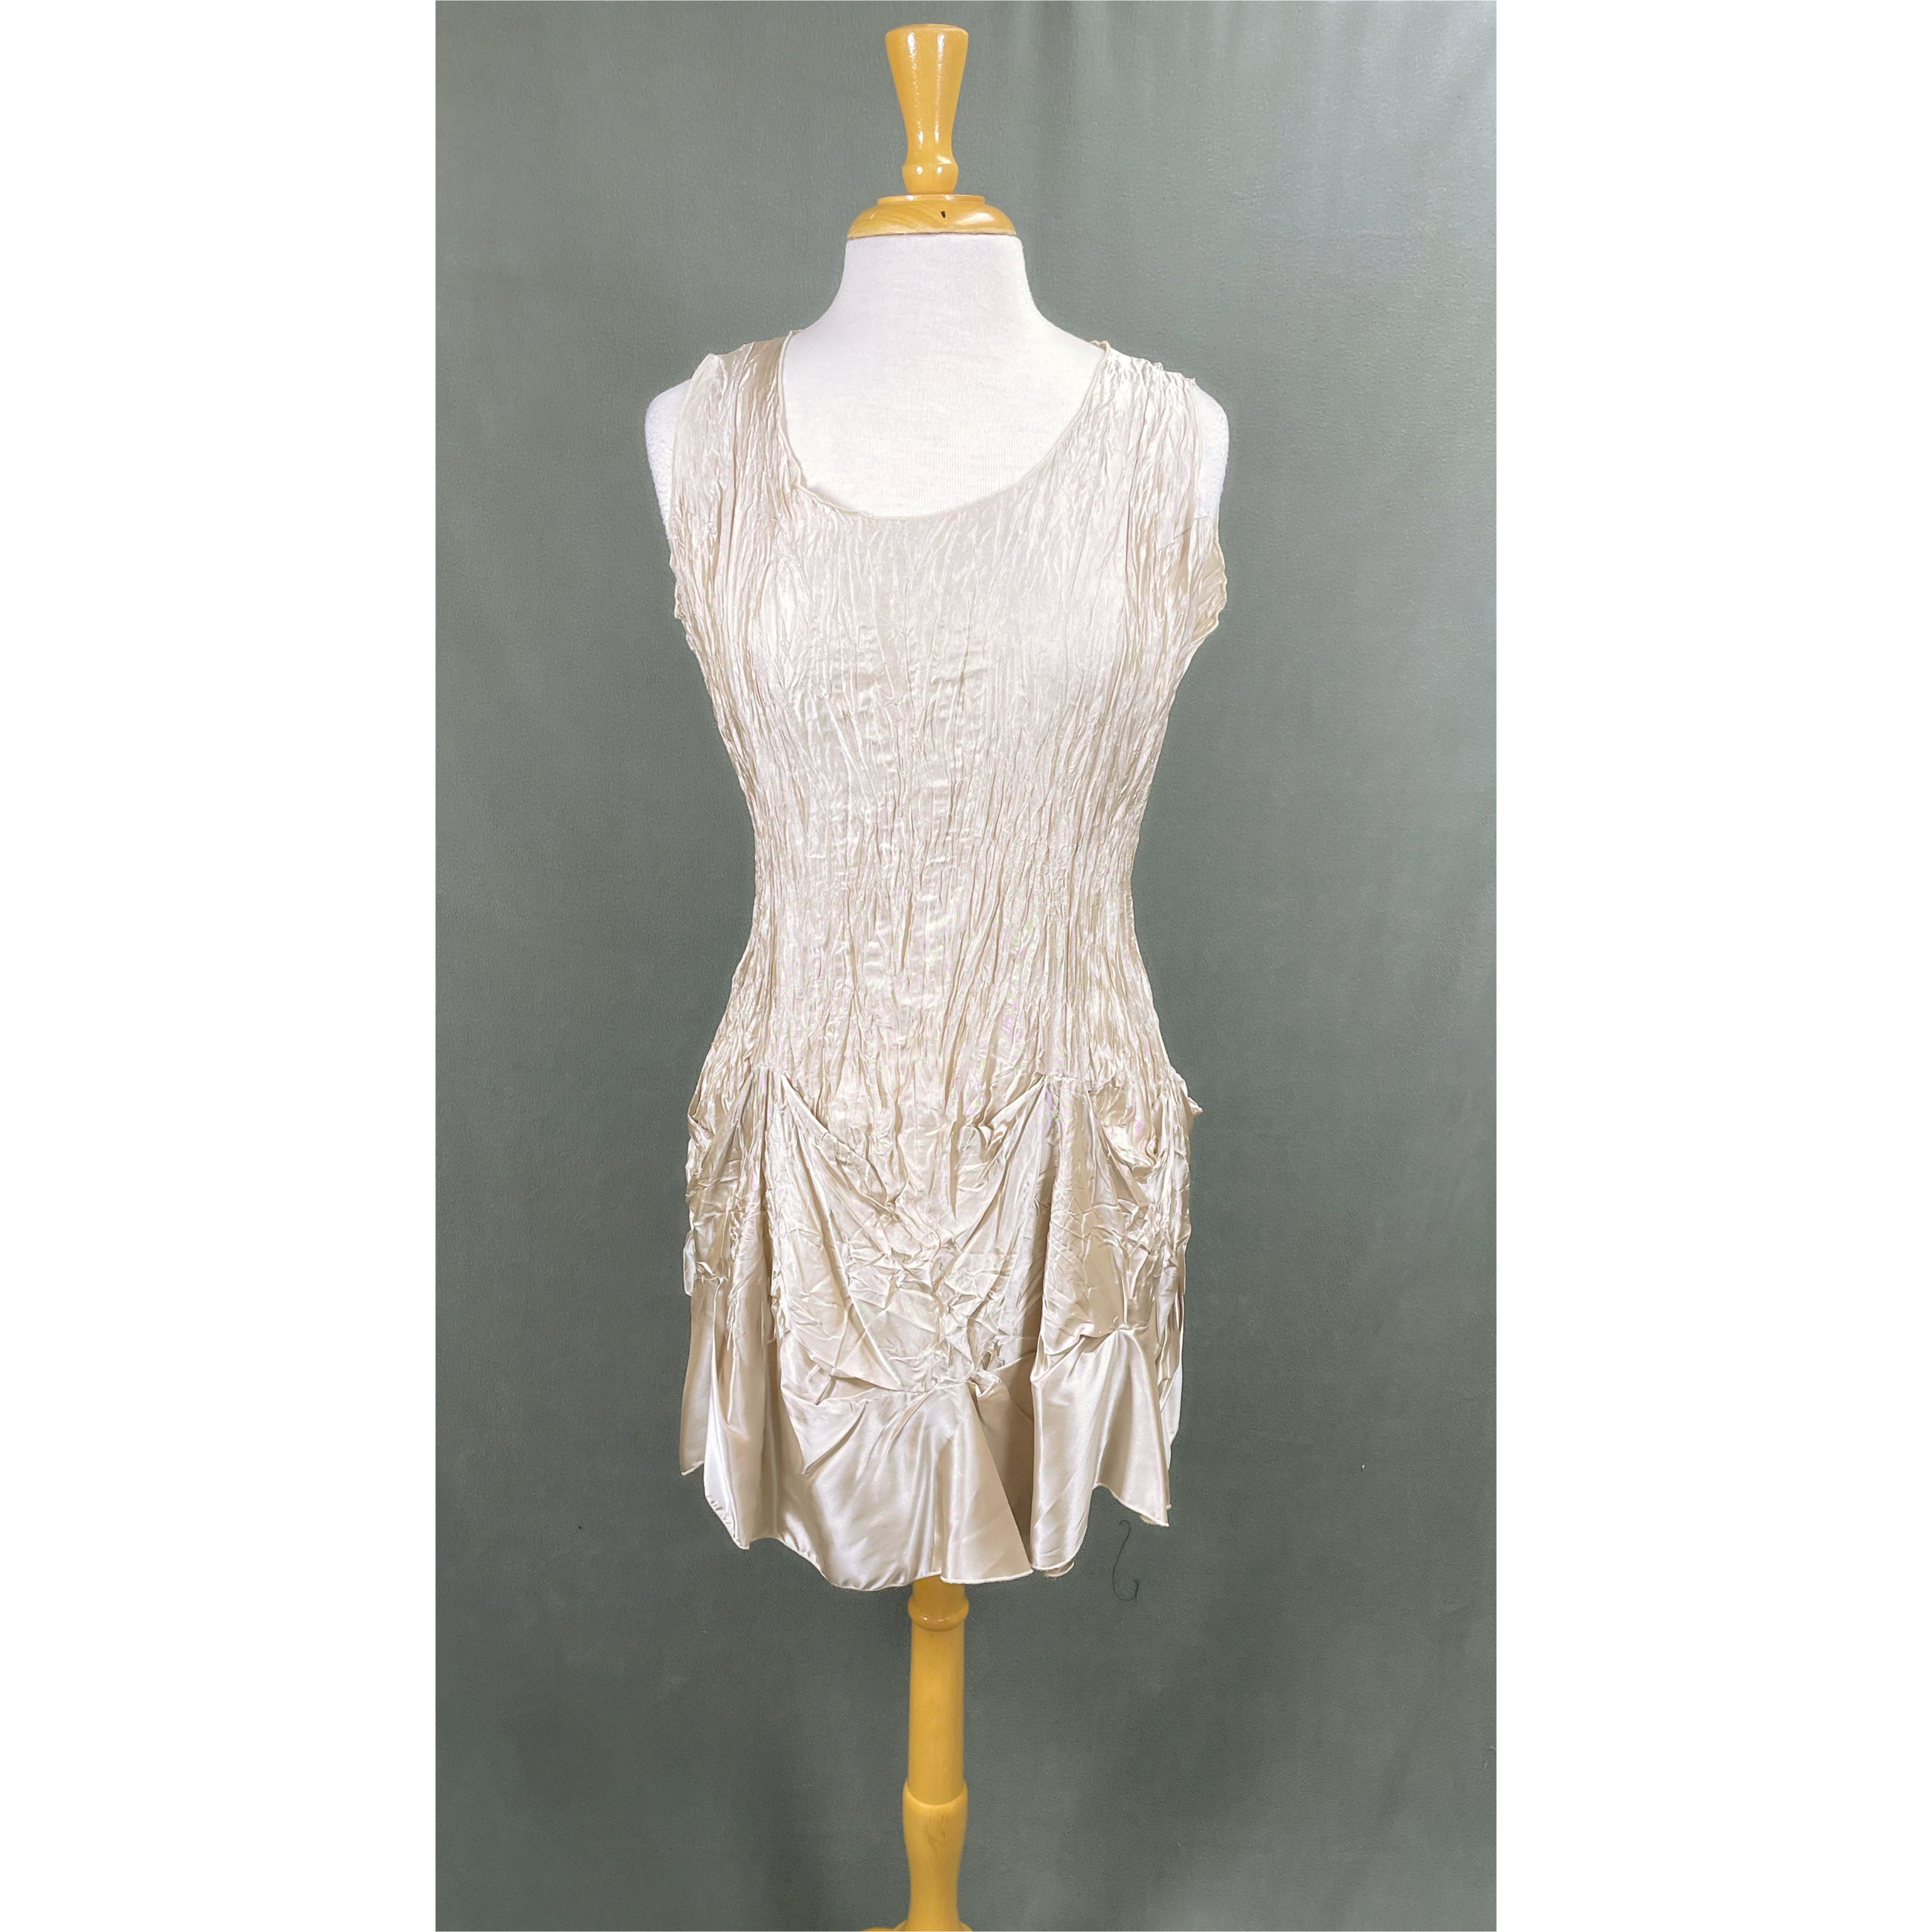 Lee Anderson champagne dress, size L